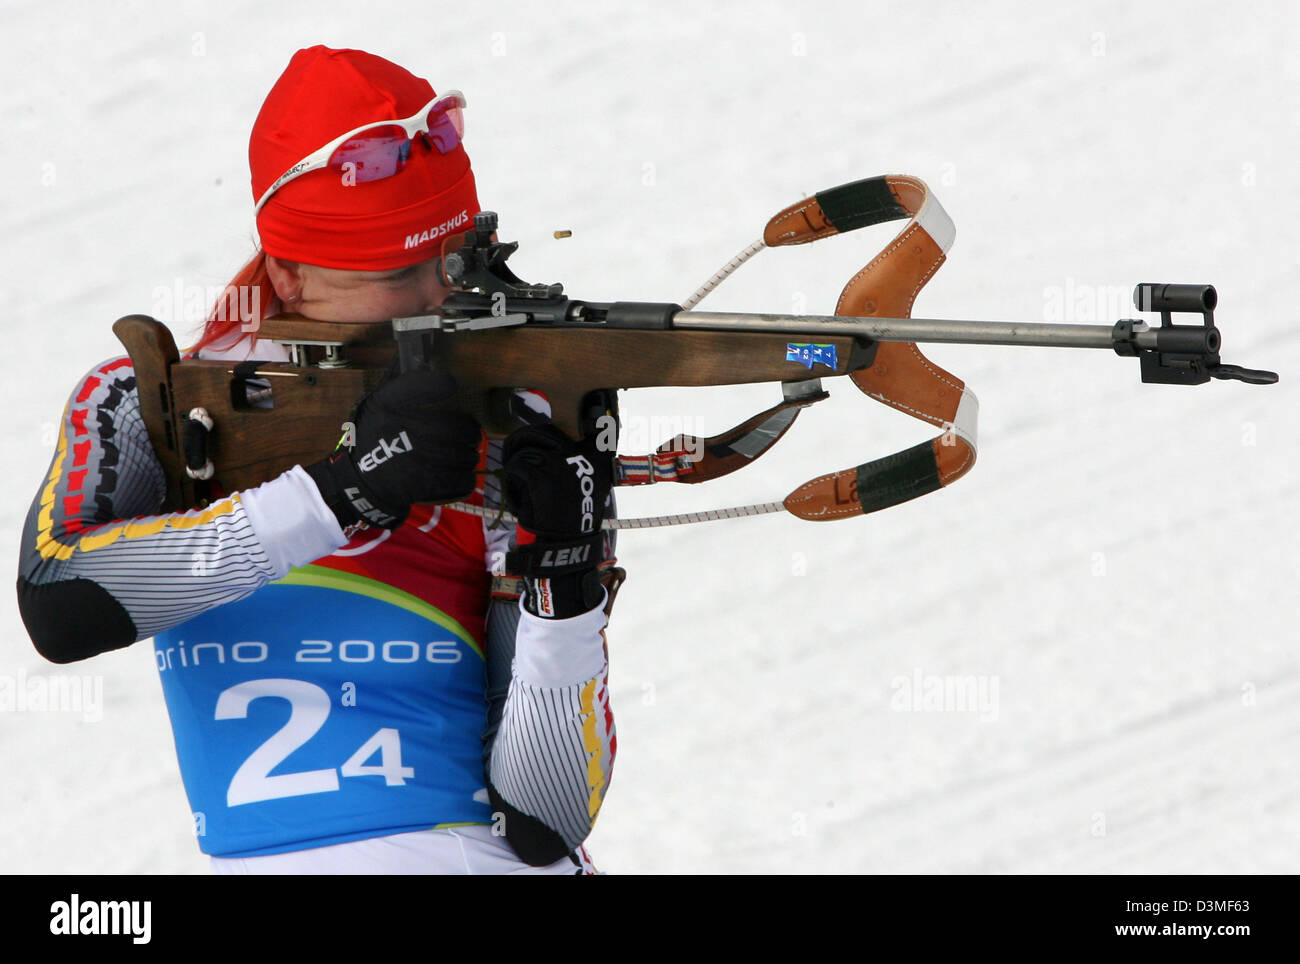 German biathlete Kati Wilhelm aims with her rifle as she stands at the shooting range in the Women's 4 x 6km Biathlon Relay at the Olympic Winter Games in San Sicario, Italy, Thursday, 23 February 2006. The German team won silver. Photo:  Martin Schutt Stock Photo